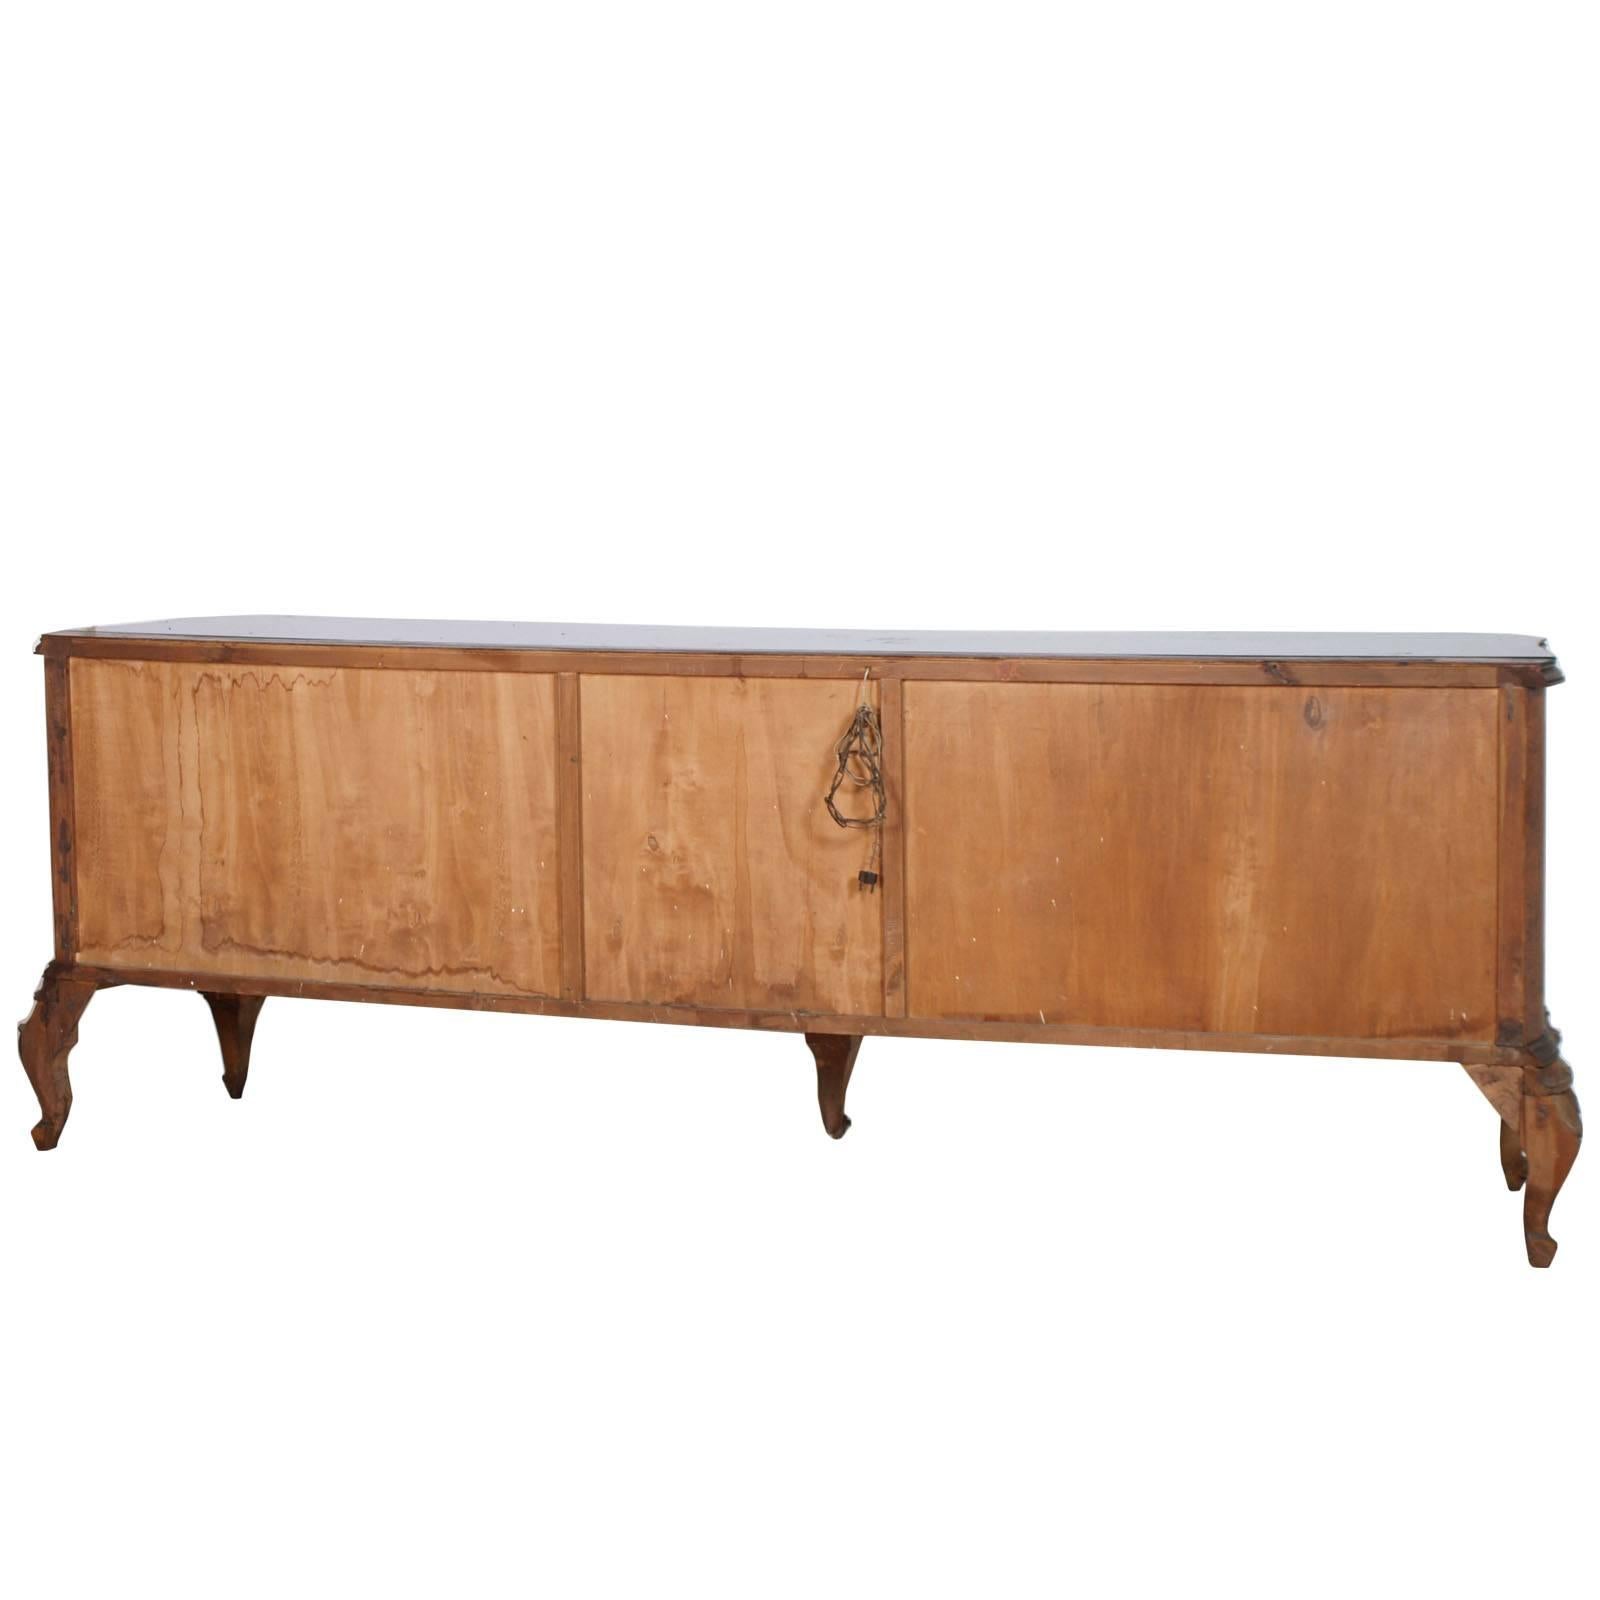 Large Venetian Baroque Chippendale Credenza with Dry Bar and Golden Leaf Mirror For Sale 2